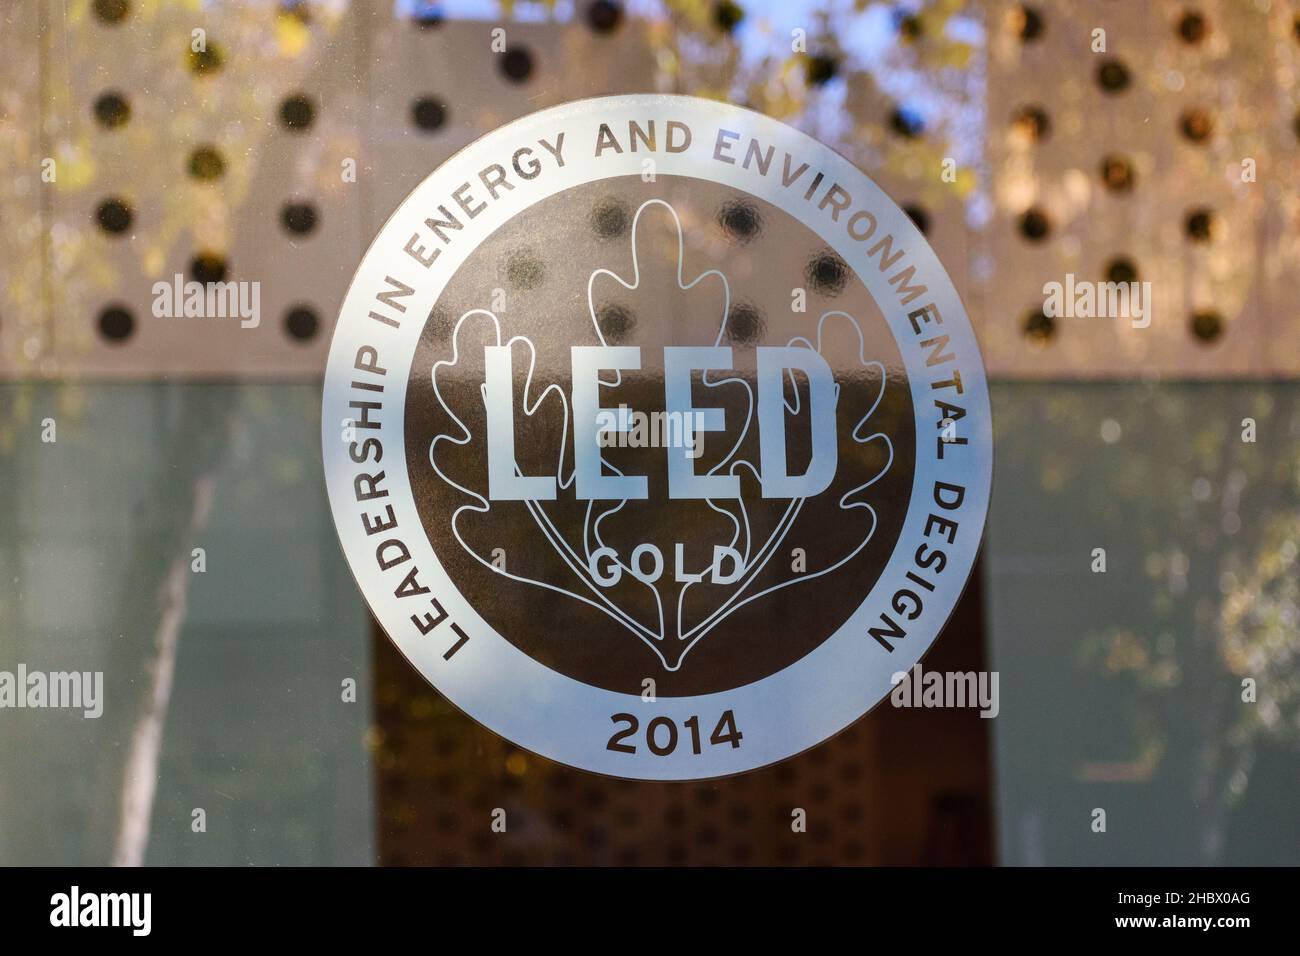 LEED Gold level certification sign. Leadership in Energy and Environmental Design, LEED, is a green building certification program used worldwide - Sa Stock Photo